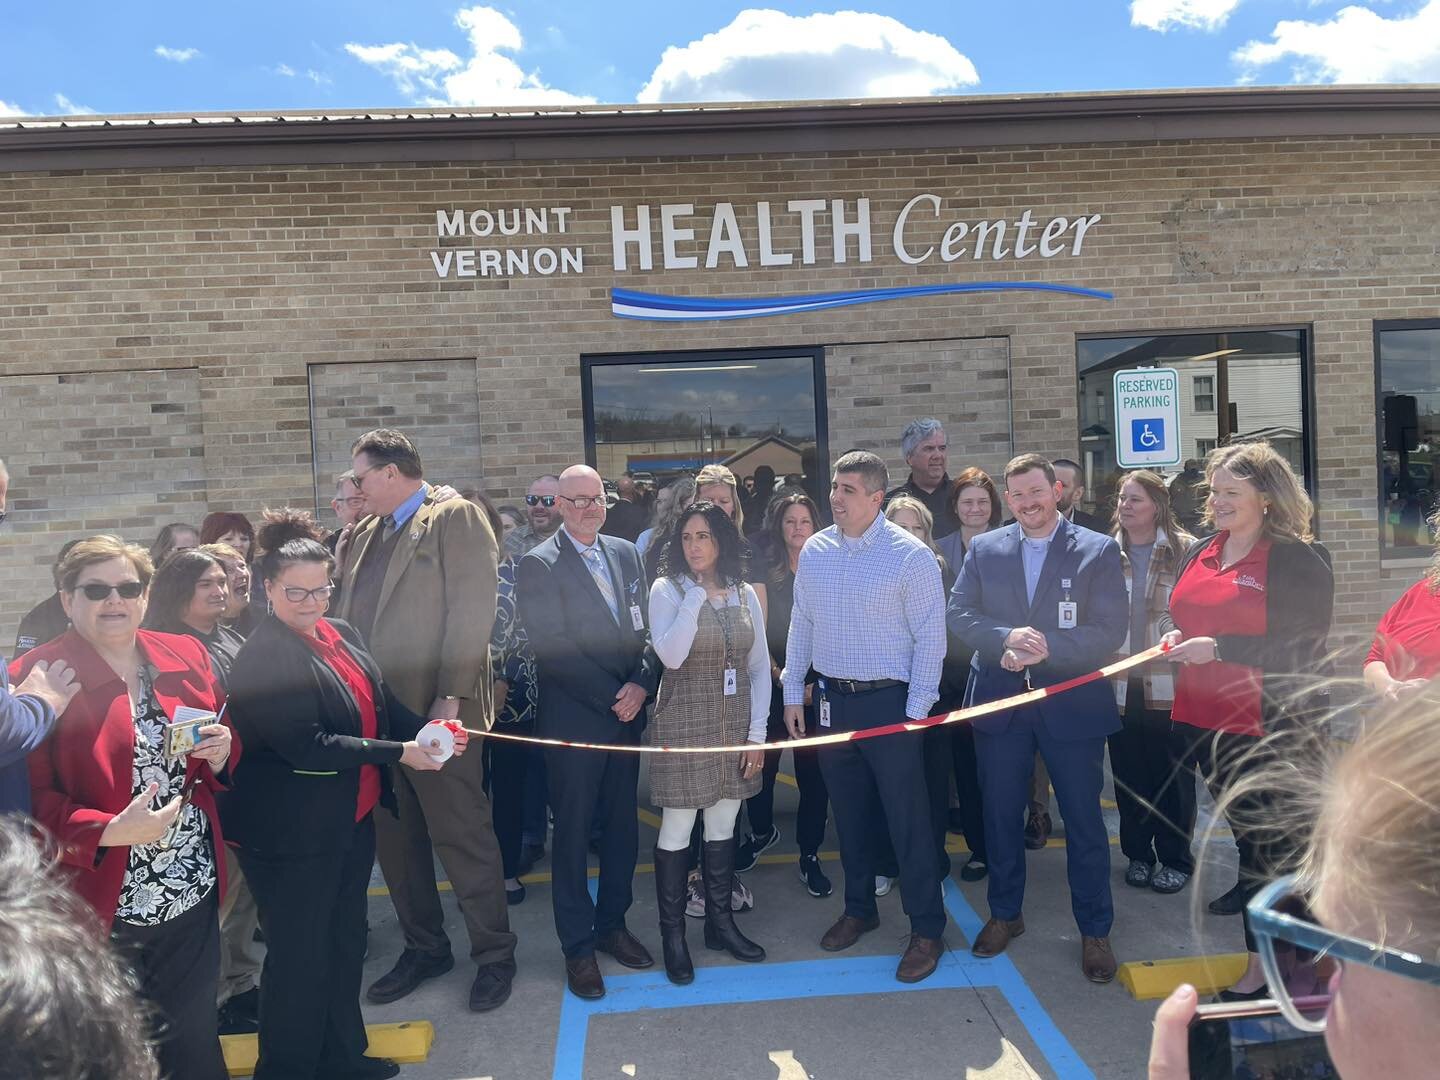 We are excited to welcome  Knox Public Health - Mount Vernon, Ohio to the Downtown Mount Vernon community and congratulate them on opening their new Downtown Health Center on West Vine Street!🎉